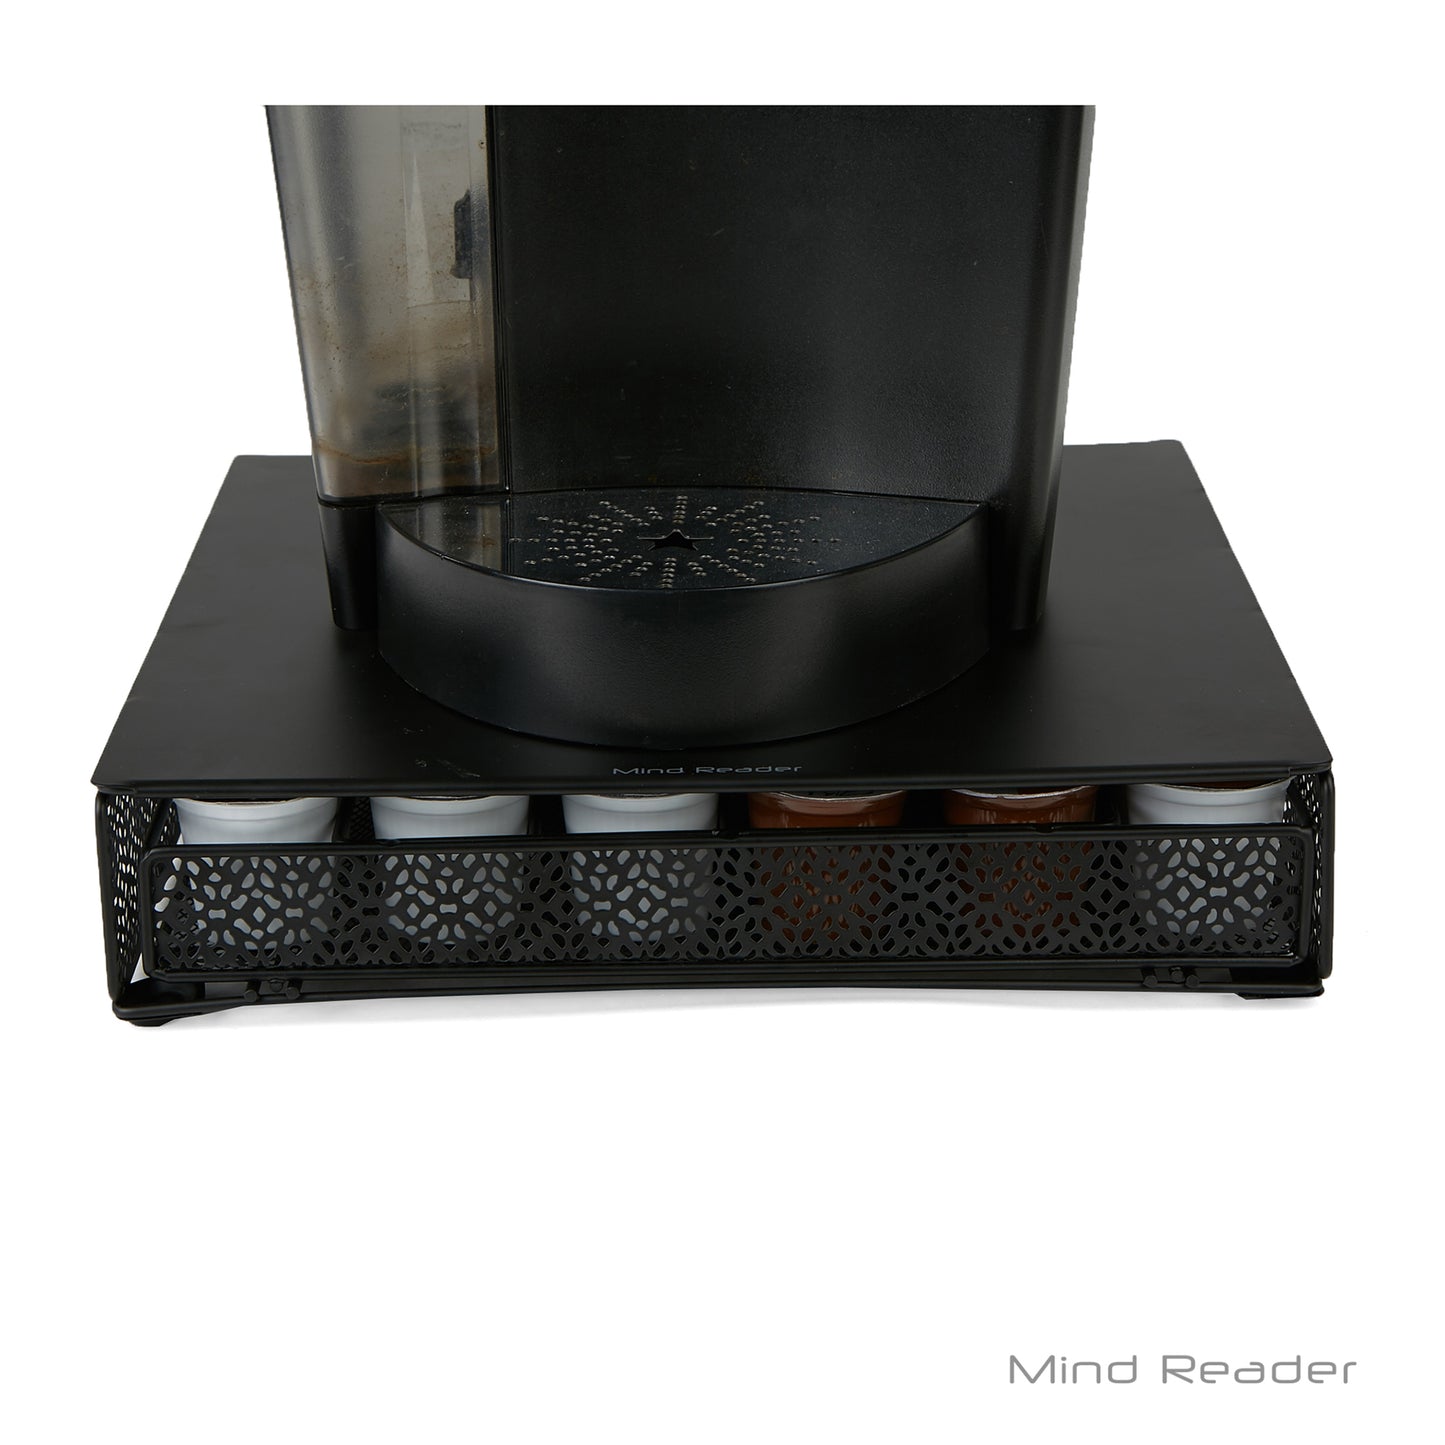 Mind Reader Network Collection, Single Serve Coffee Pod Drawer, 36 or 72 Coffee Pod Capacity, Coffee Machine Base, Solid Metal Top with Decorative Mesh Drawer, 13"L x 12.75"W x 3"H, Black